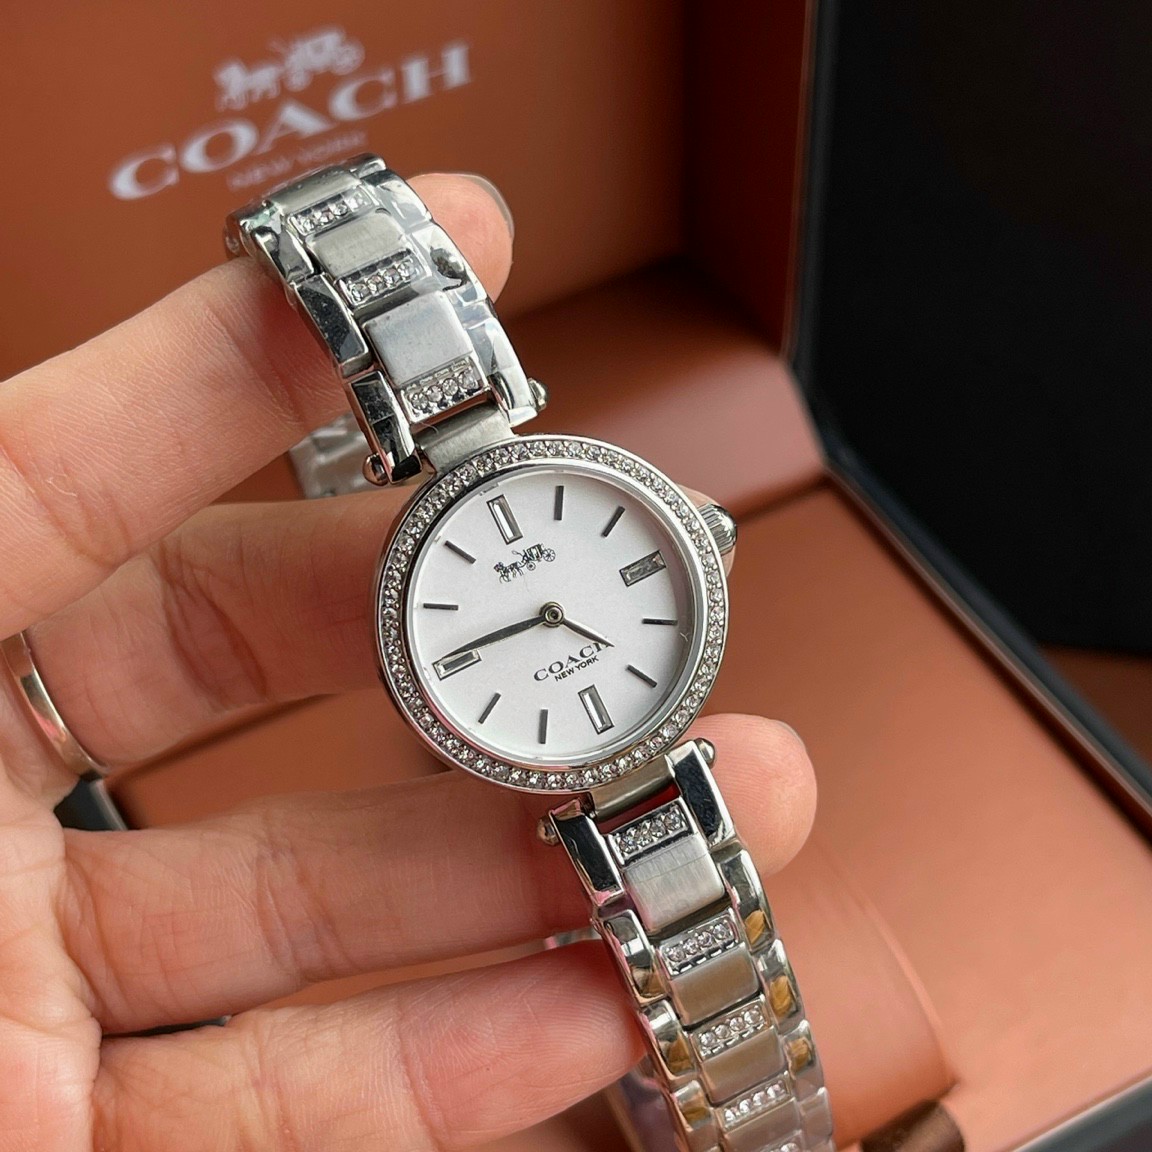 ĐỒNG HỒ NỮ DÂY KIM LOẠI COACH PARK QUARTZ WATCH WITH ANALOG DISPLAY AND STAINLESS STEEL STRAP 14503097 15